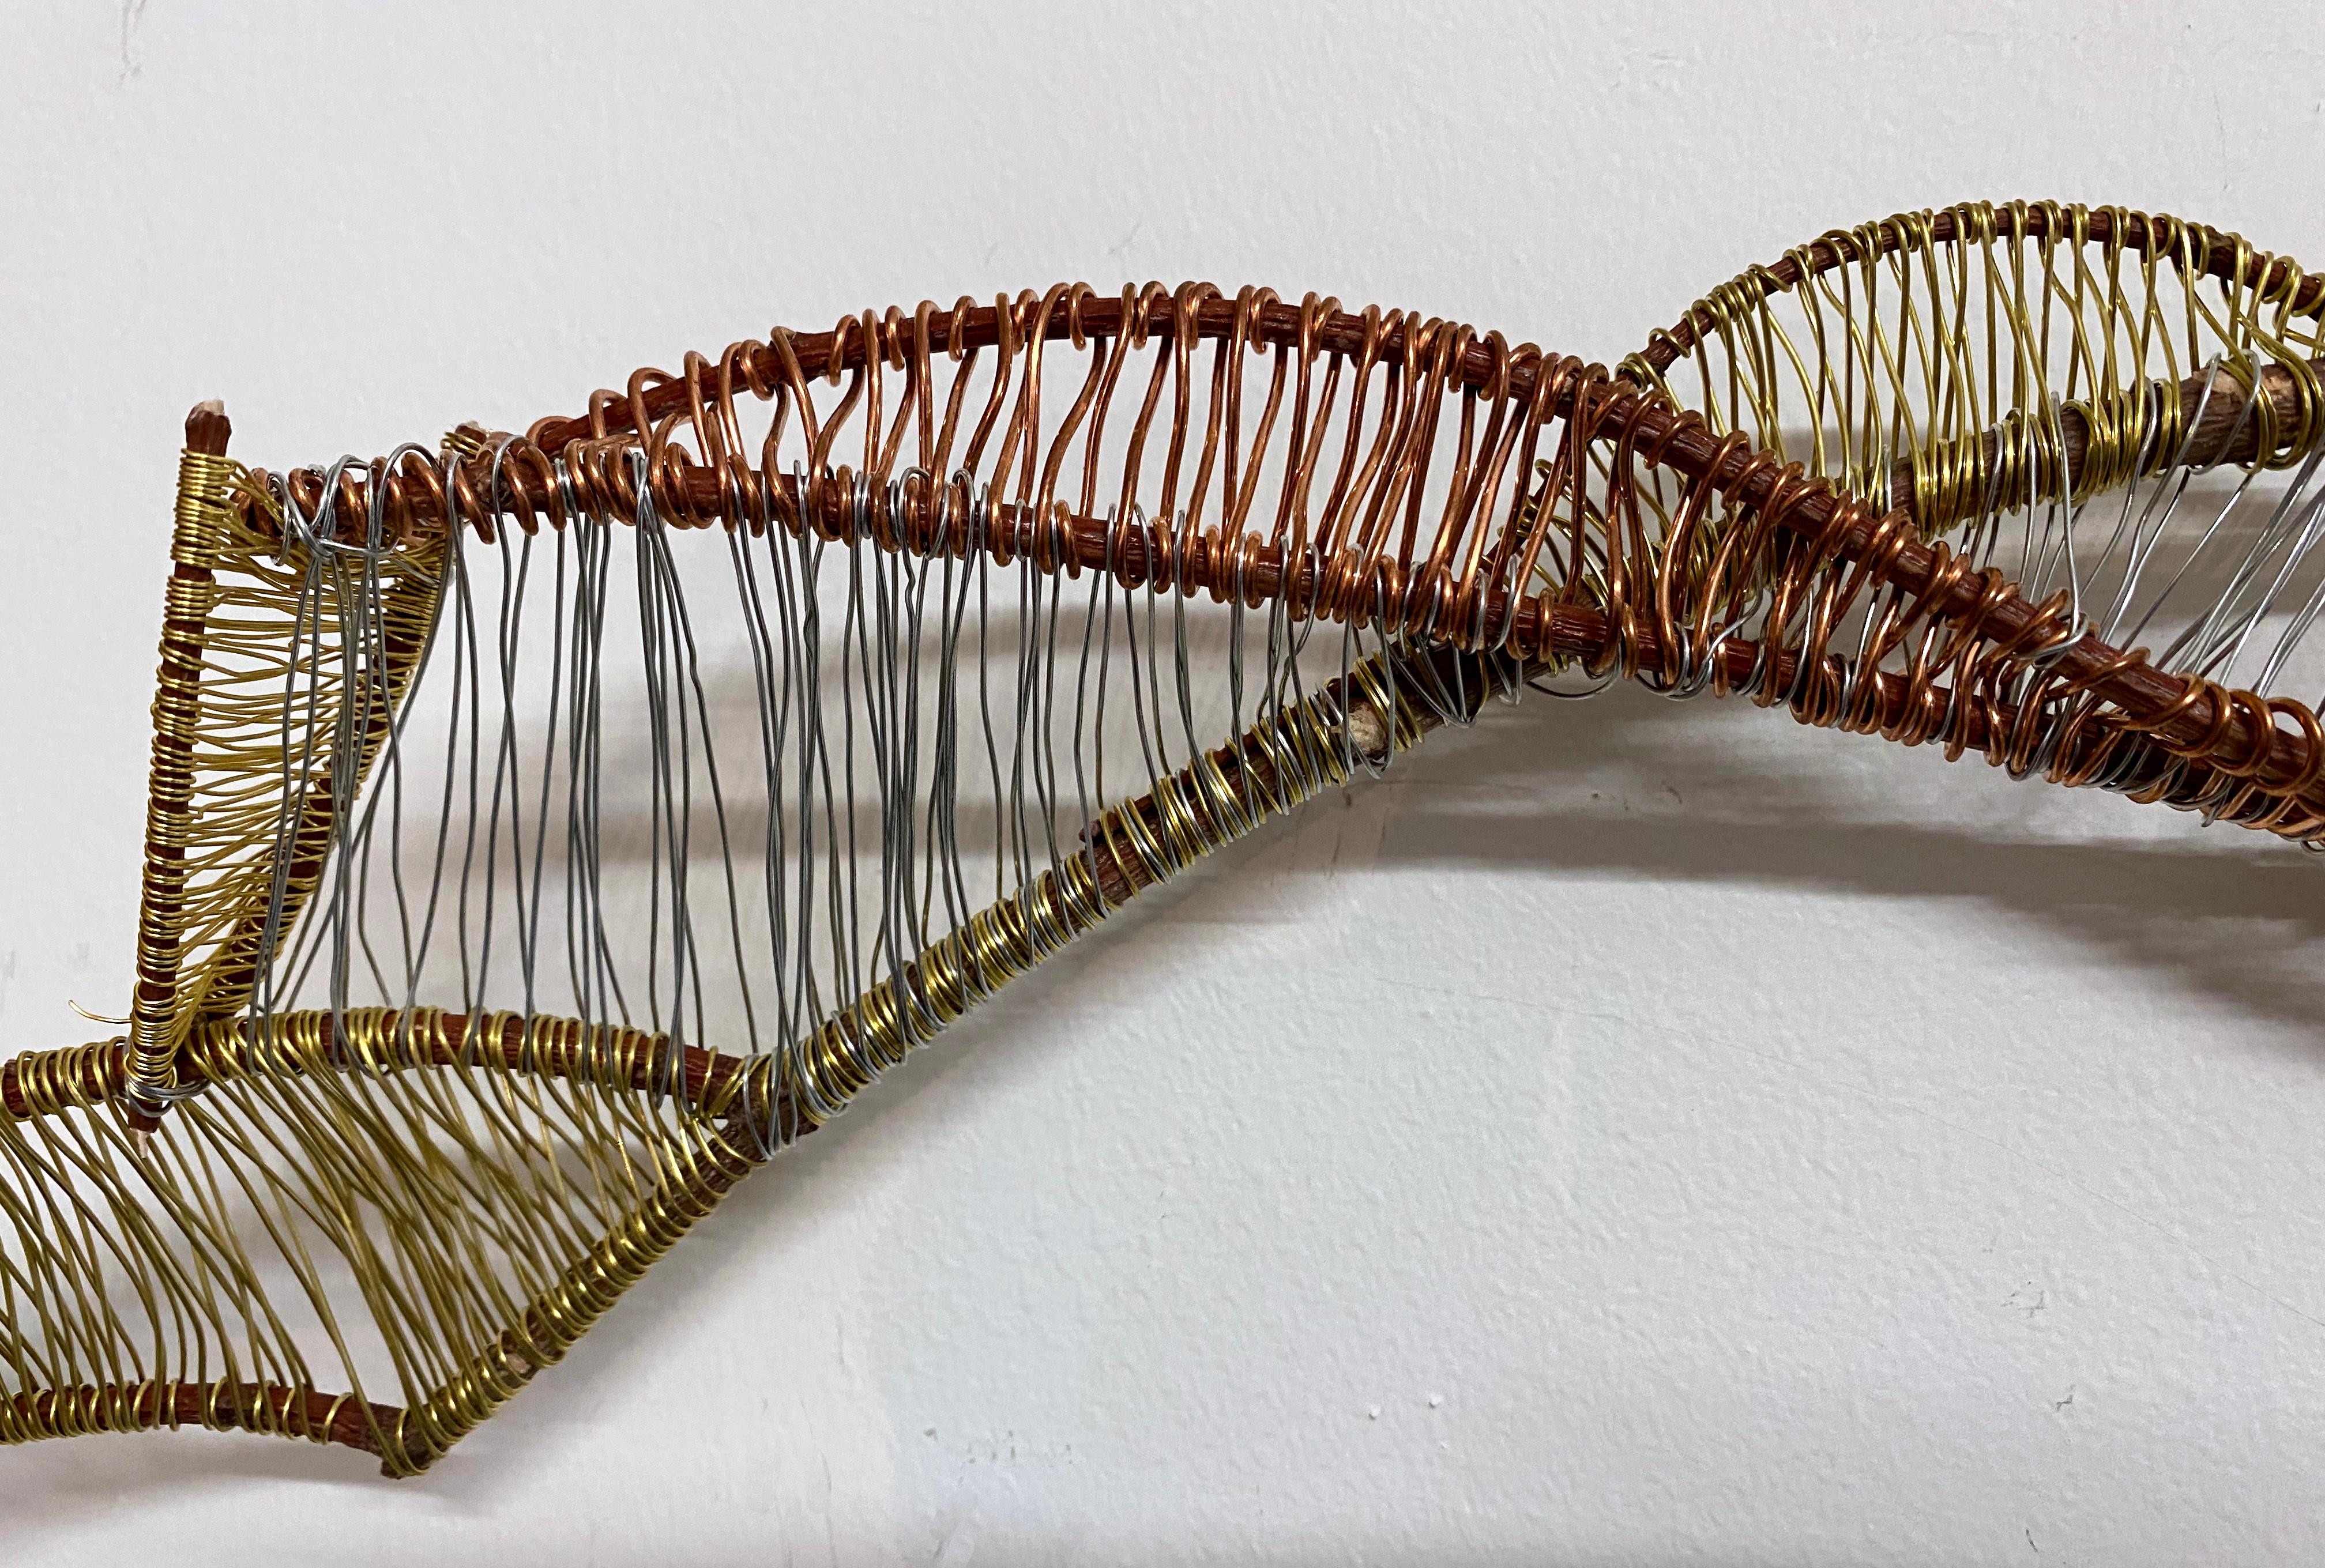 Stipule - dramatic curved line sculpture made from branches and wire - Sculpture by Paige Pedri